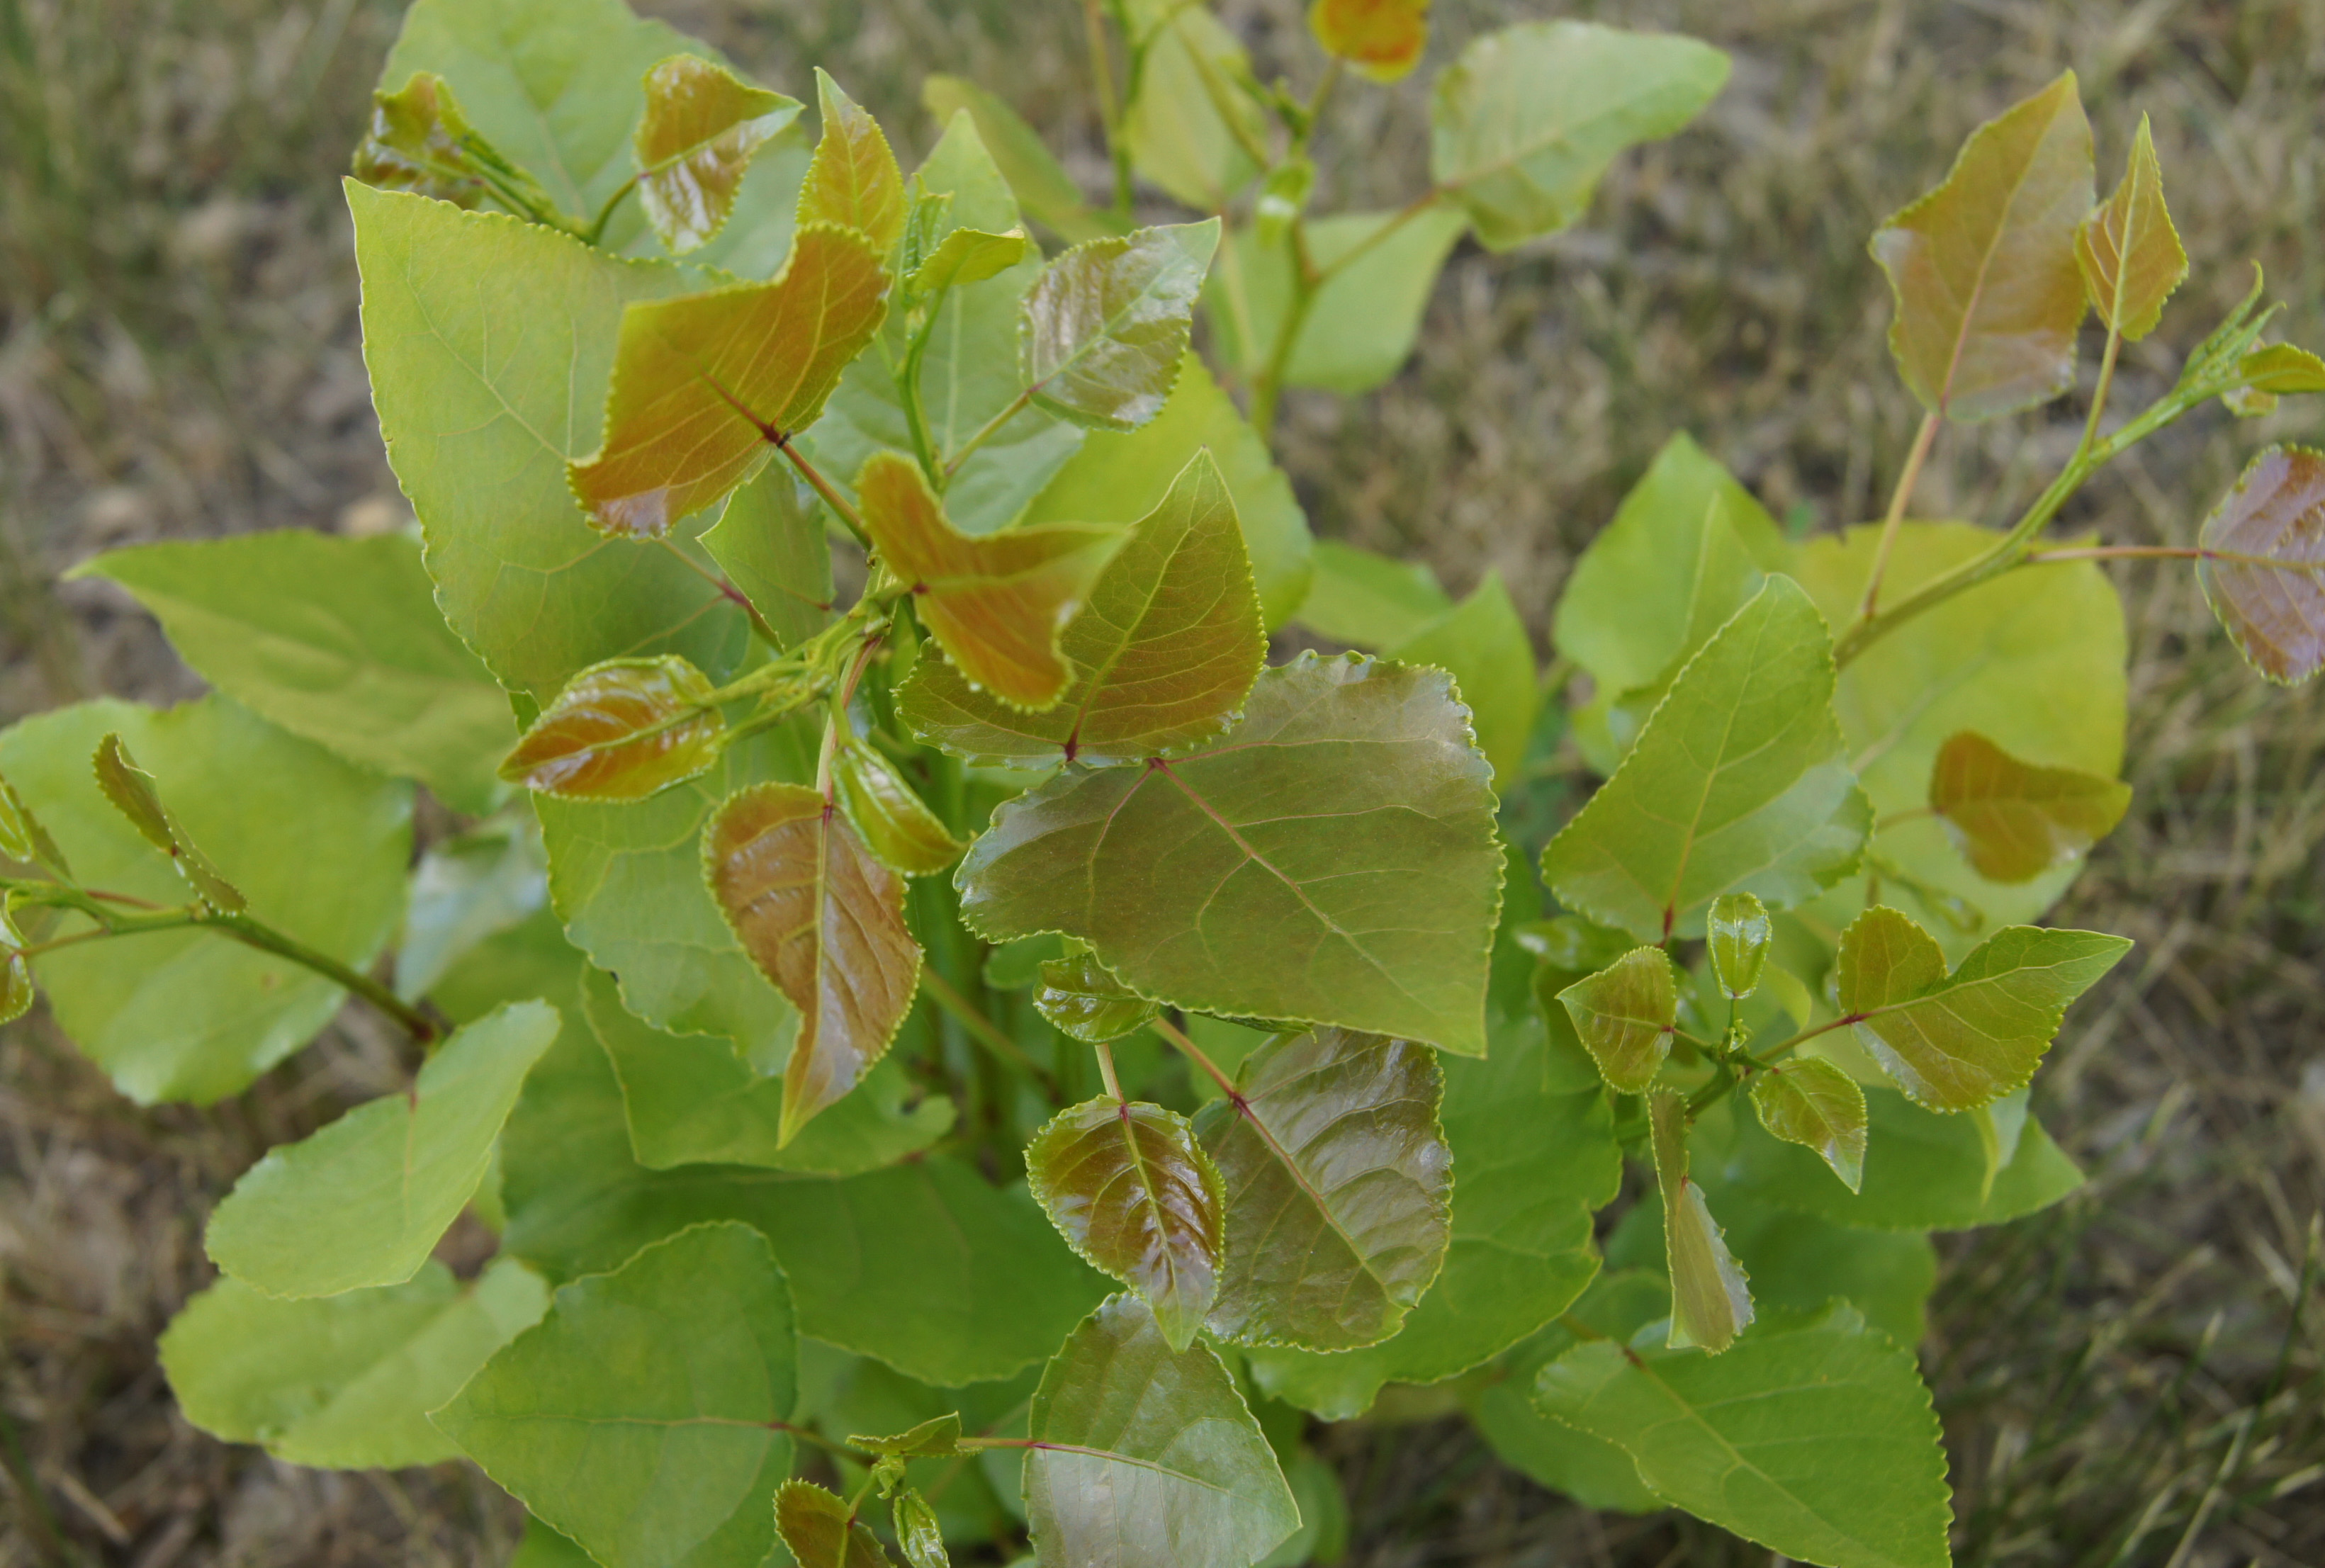 Newly formed leaves of a hybrid poplar show a purple hue, changing later to green.